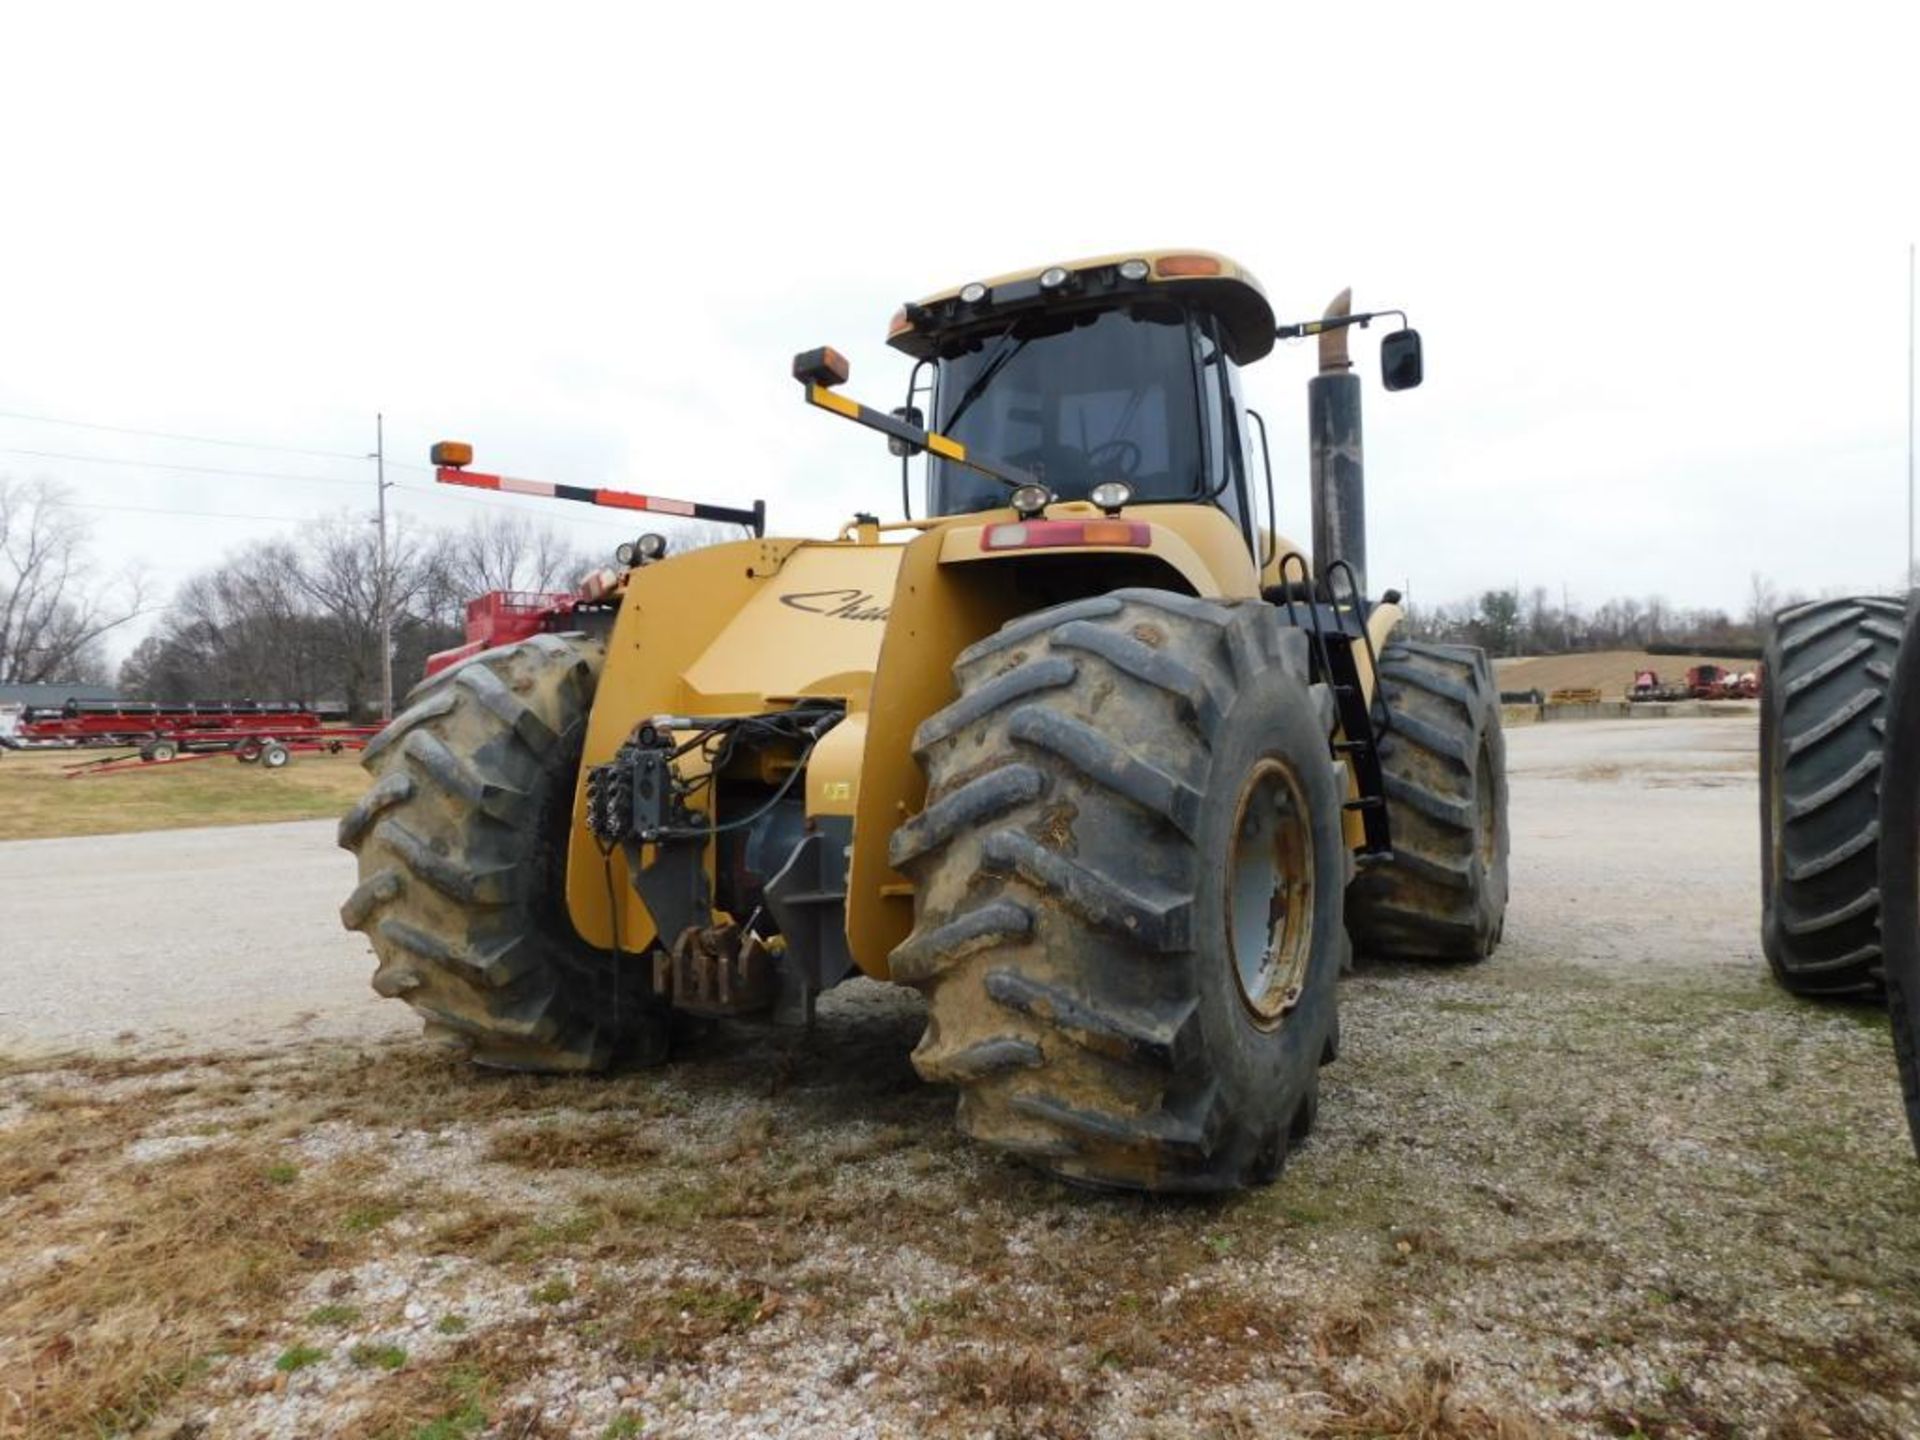 2008 Challenger-CAT Tractor Model 965B, S/N AGCC0965VNTTF1031, 4WD, CAT C18 510 HP Engine, 16-Speed - Image 4 of 5